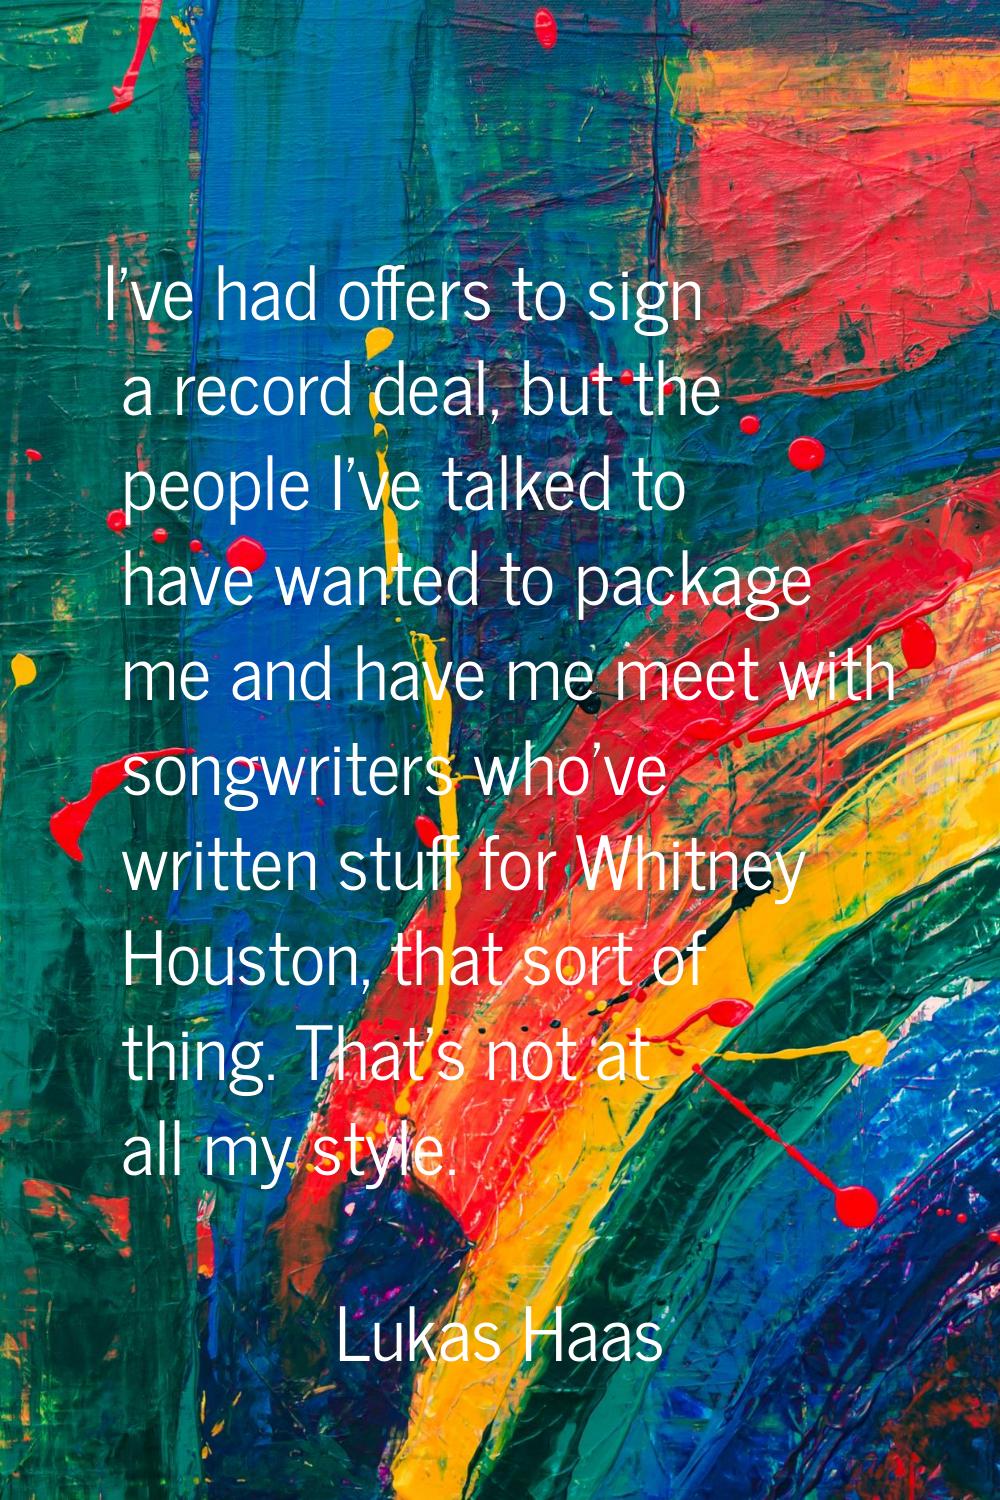 I've had offers to sign a record deal, but the people I've talked to have wanted to package me and 